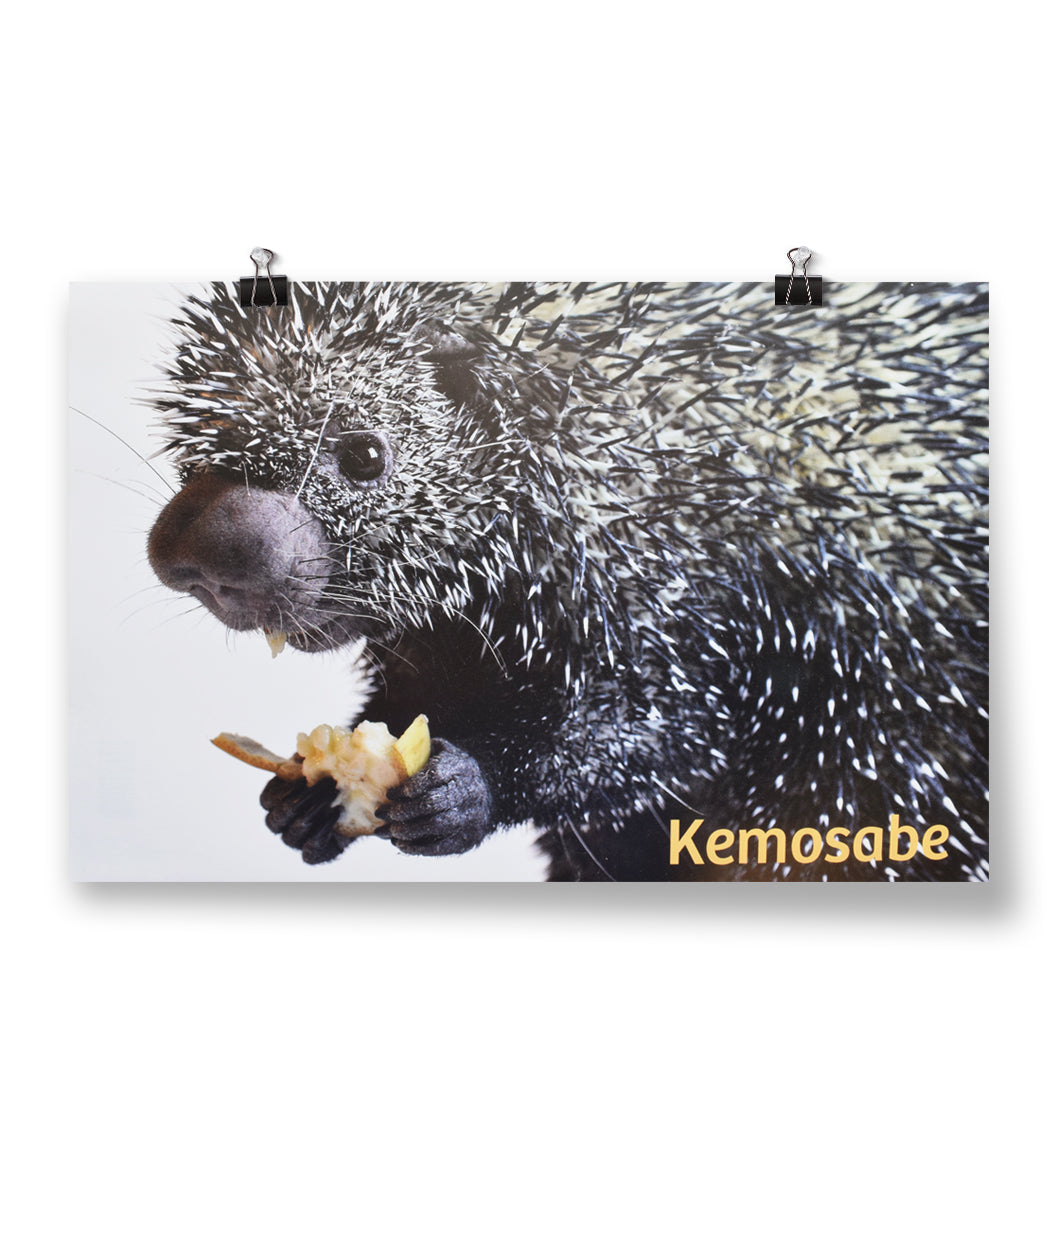 Poster hanging from two binder clips on wall. Poster image is of black and white porcupine holding a piece of fruit. Head, hands, and part of body are shown in front of white background. “Kemosabe” is written in light orange sans serif font in bottom right corner of poster - from Animal Wonders